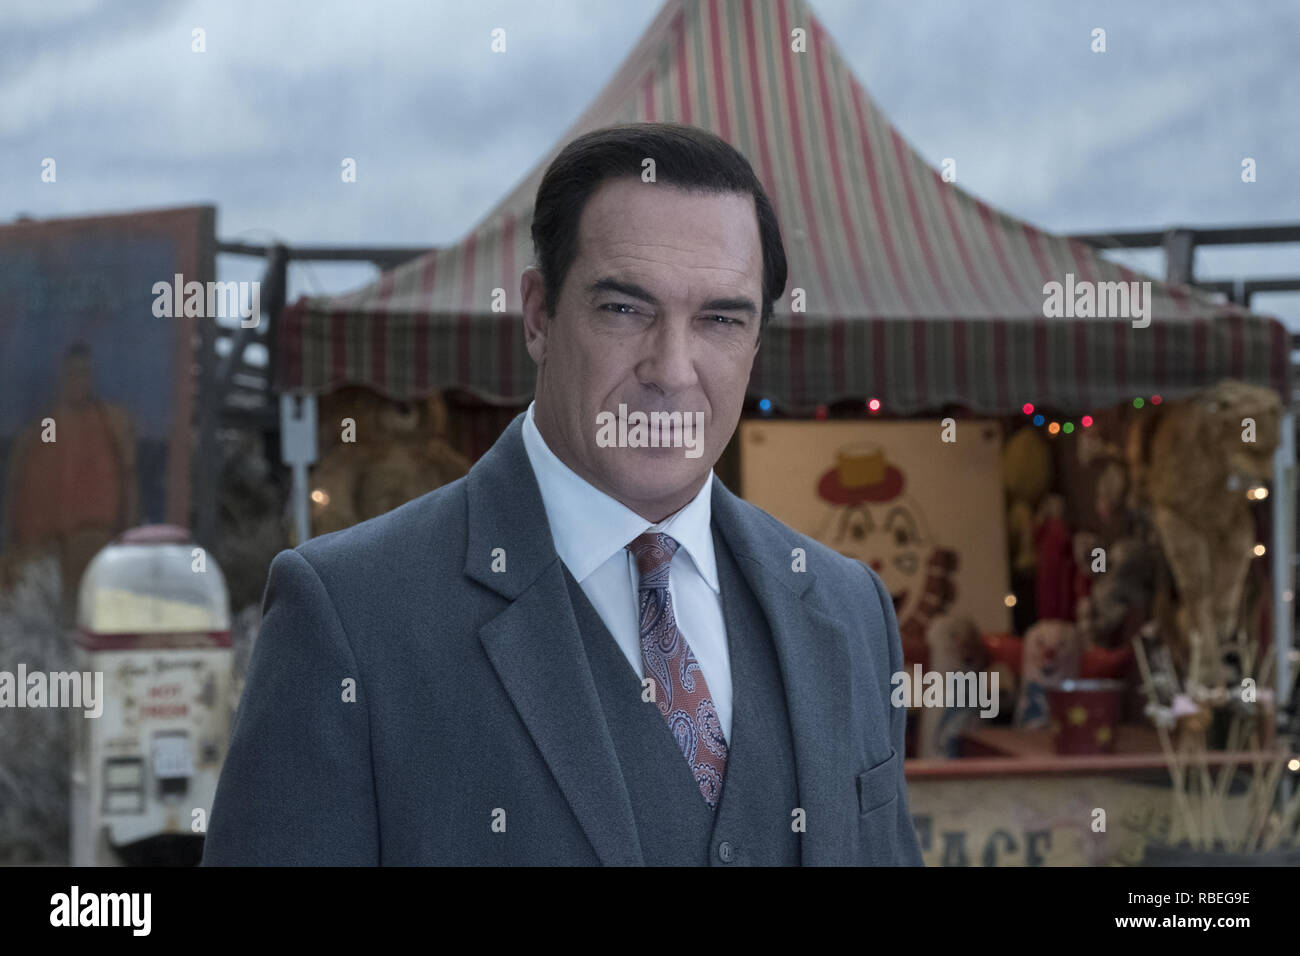 Peter Warburton, ' A Series Of Unfortunate Events' Season 2 (2018) Credit: Netflix / The Hollywood Archive Stock Photo